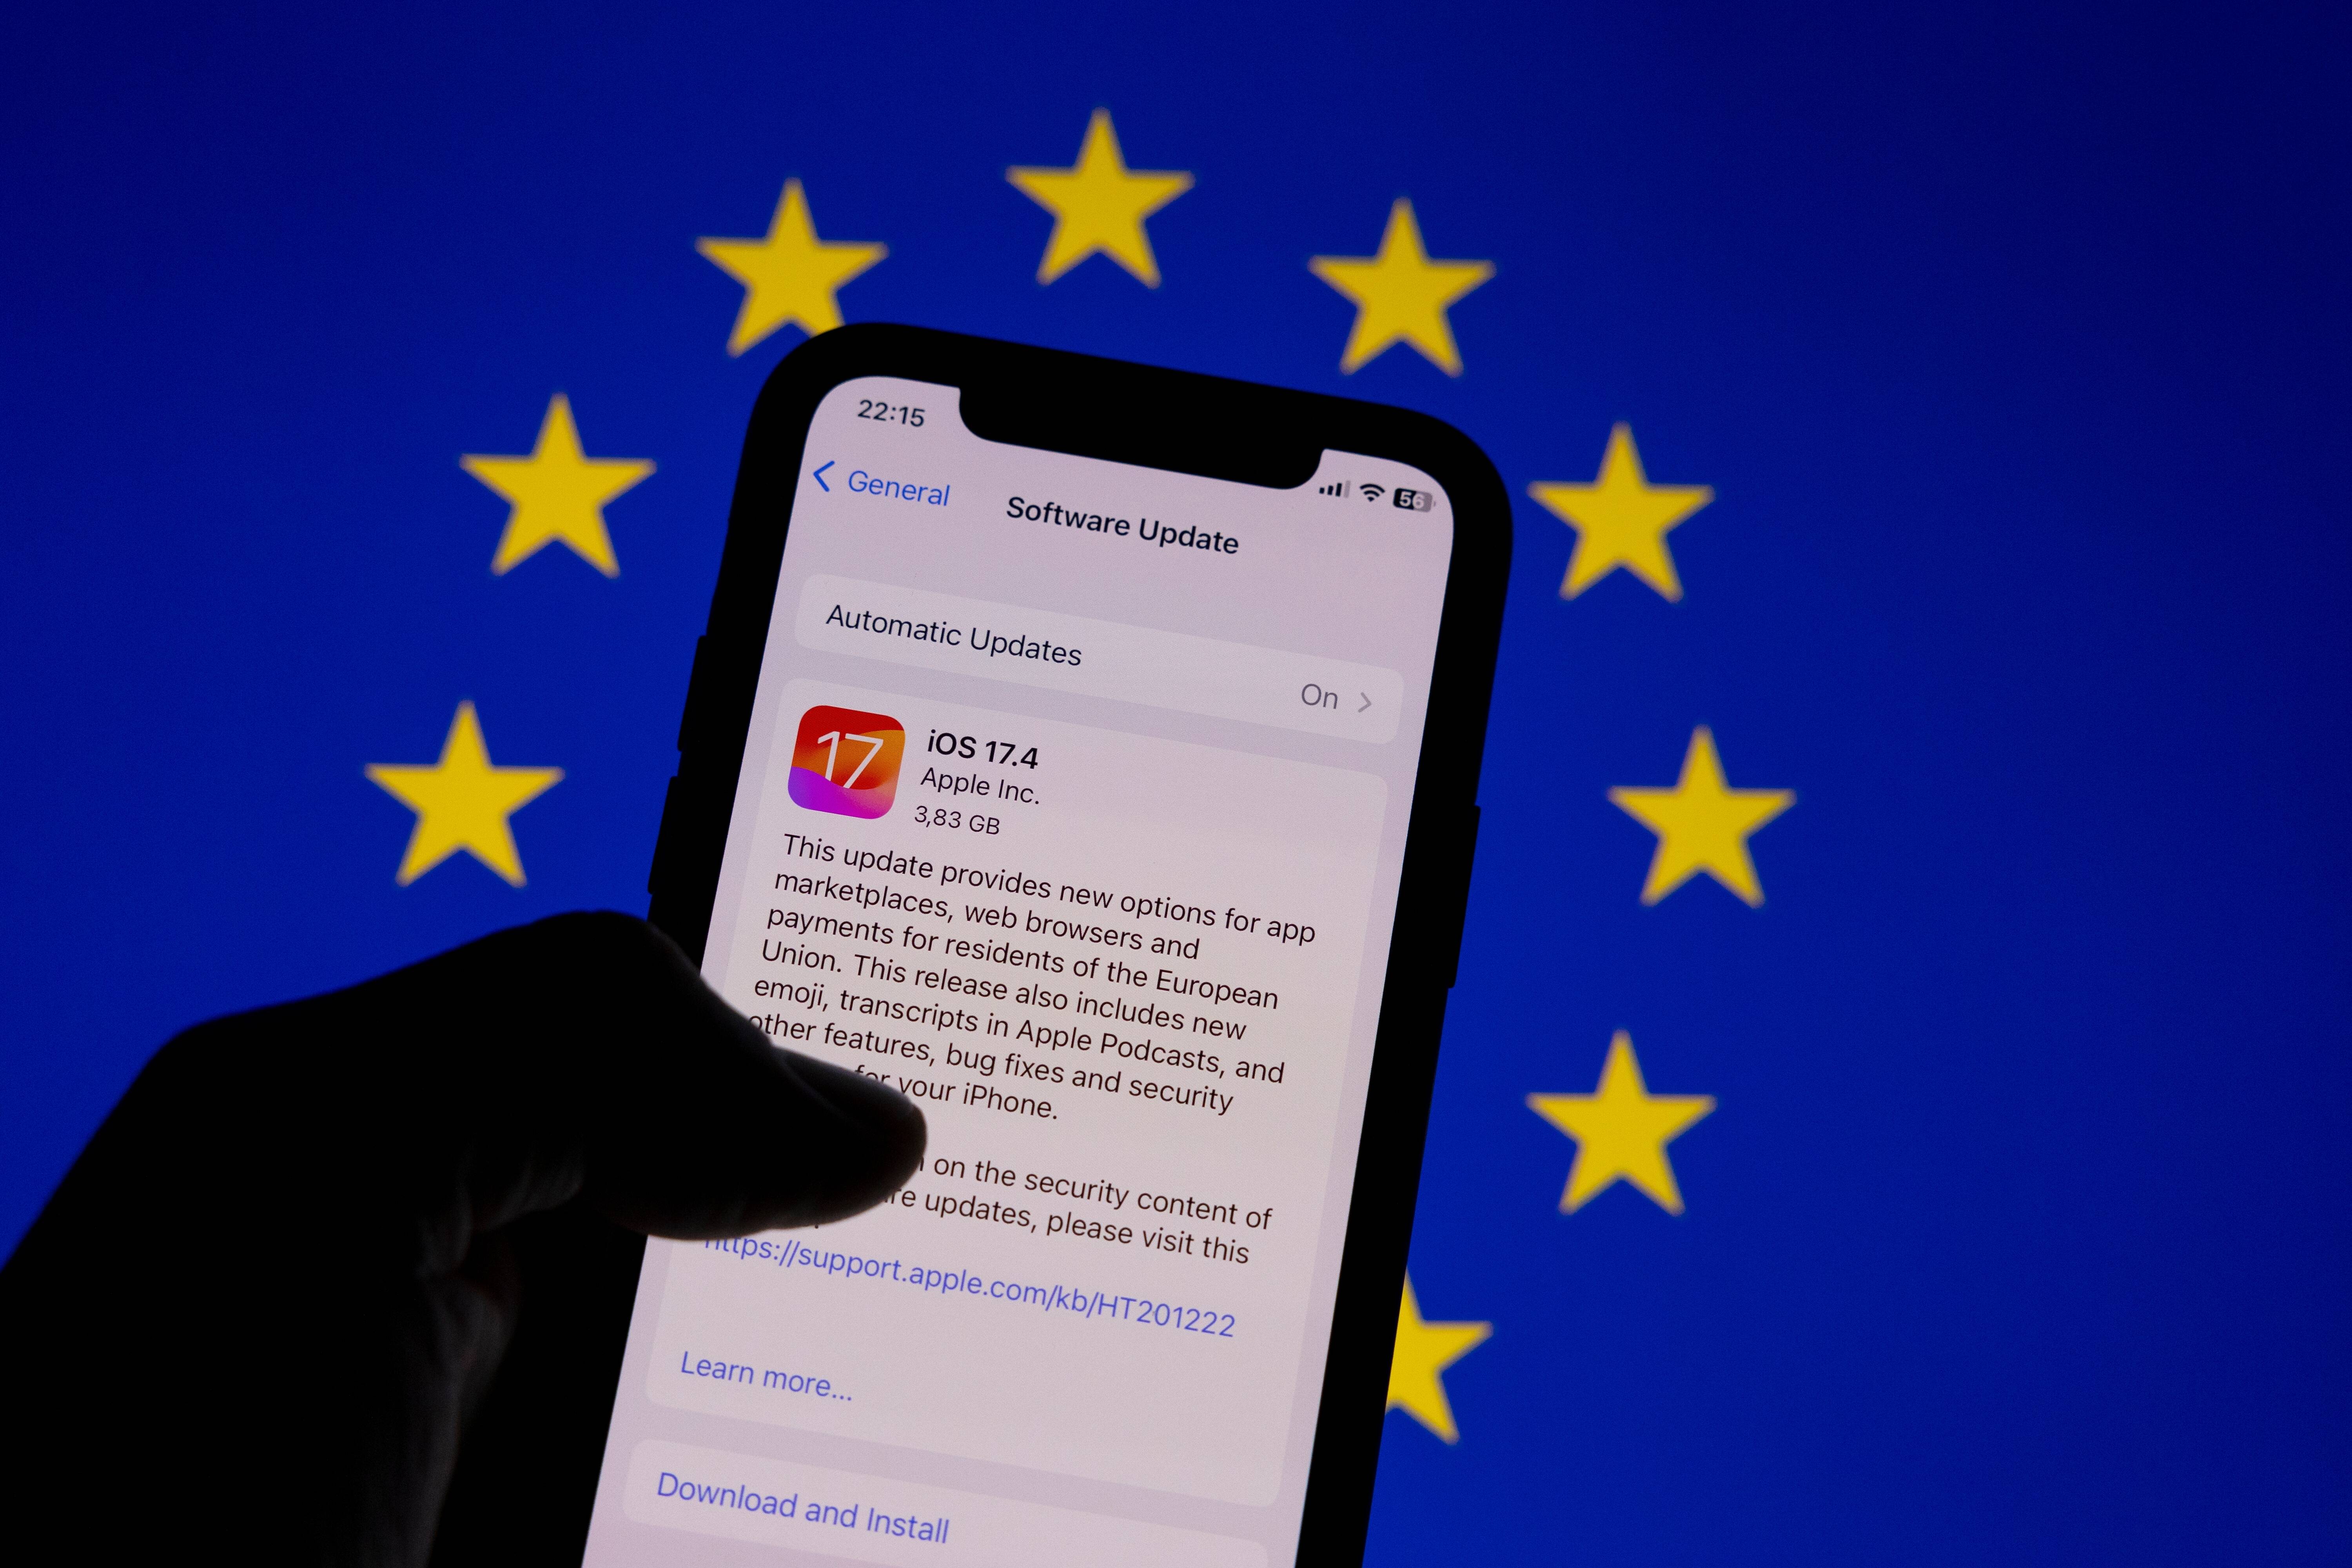 Apple geofences third-party browser engine work for EU devices